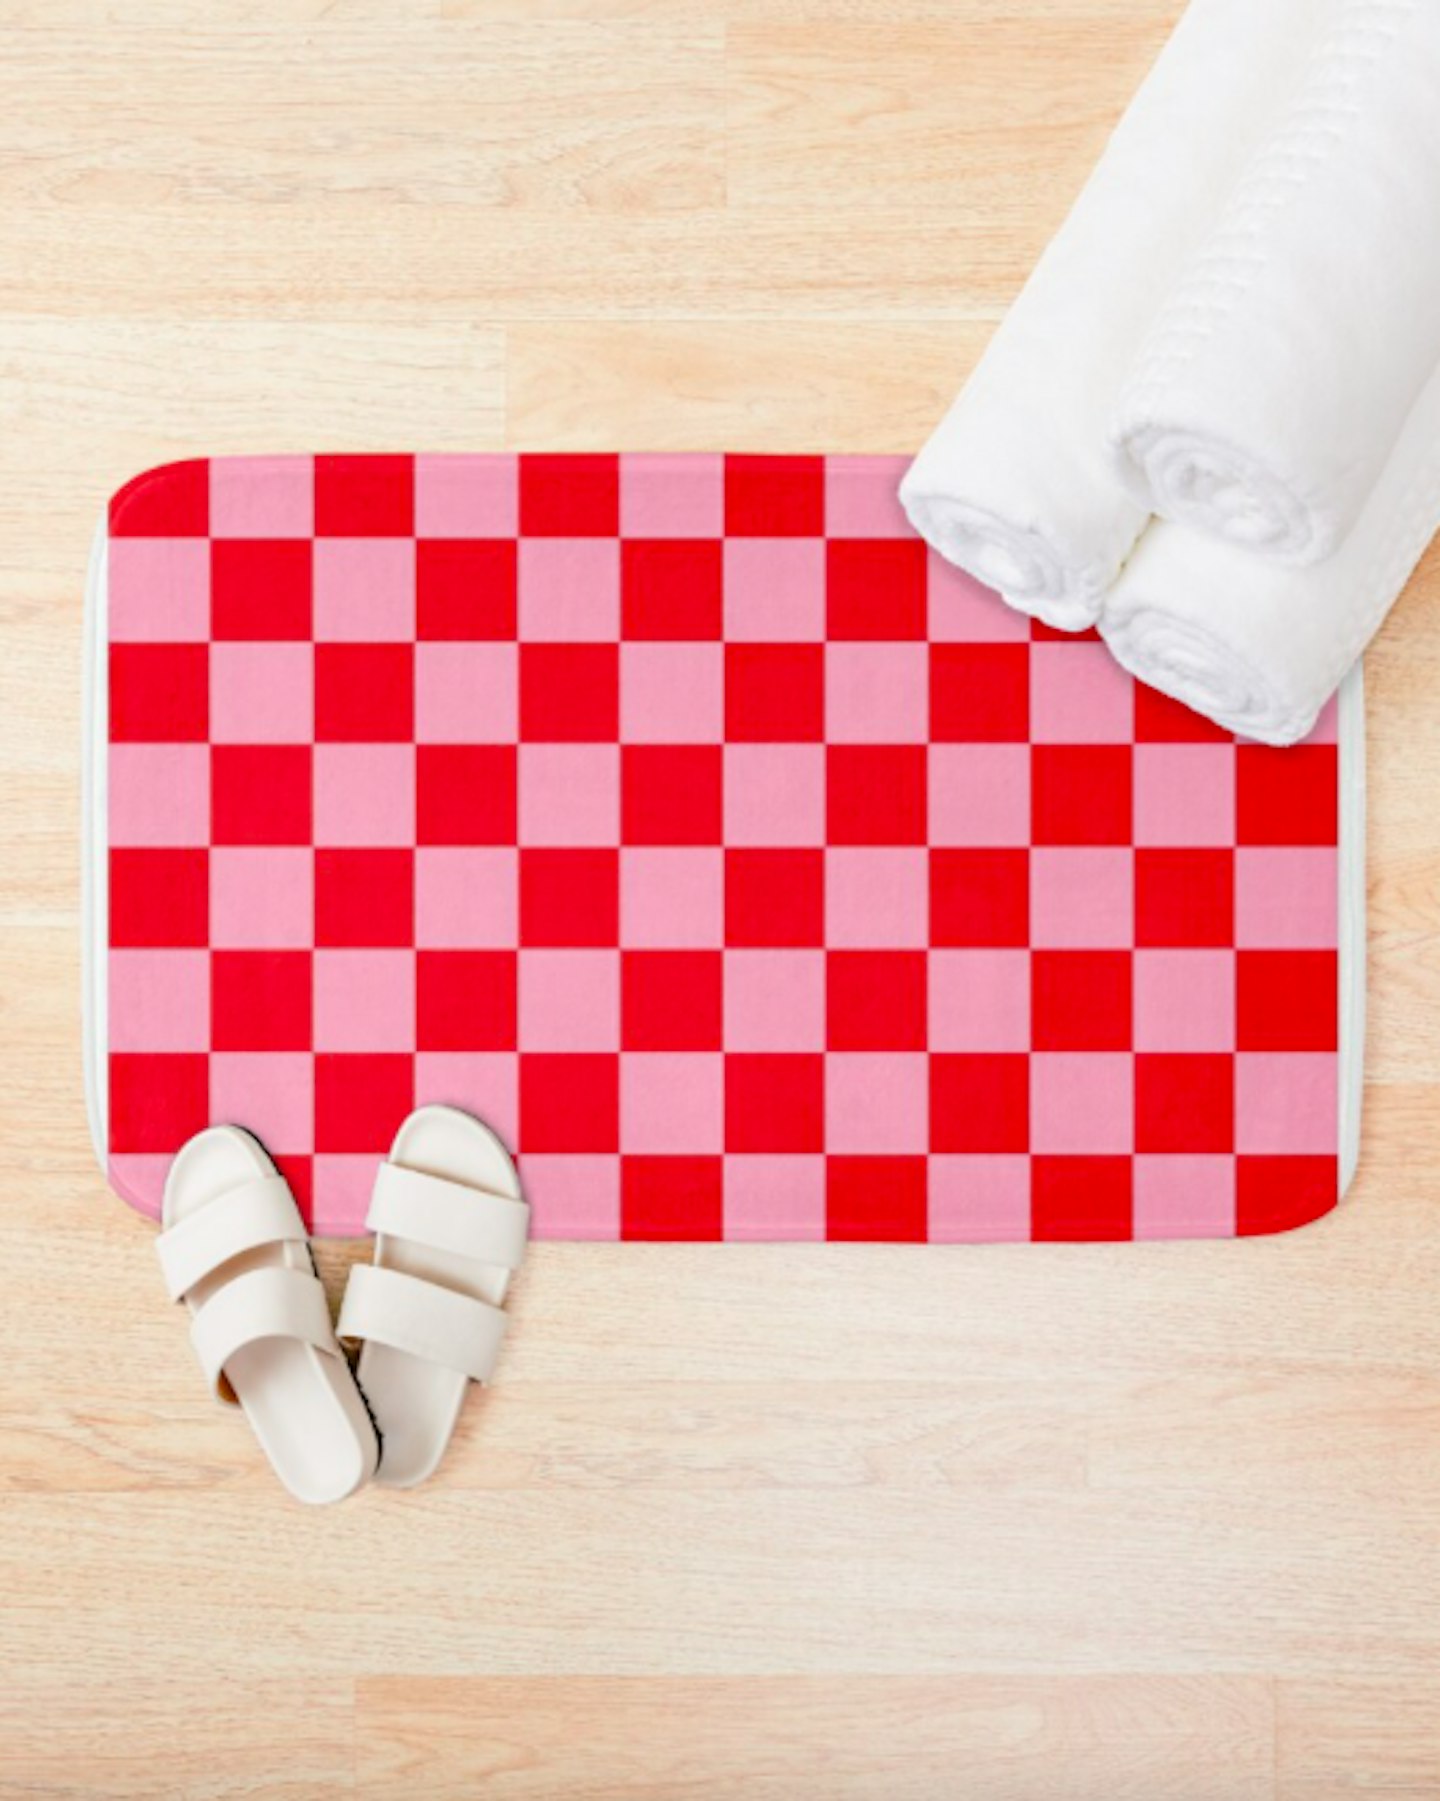 Redbubble, Checkered Pink and Red Bath Mat, £27.29